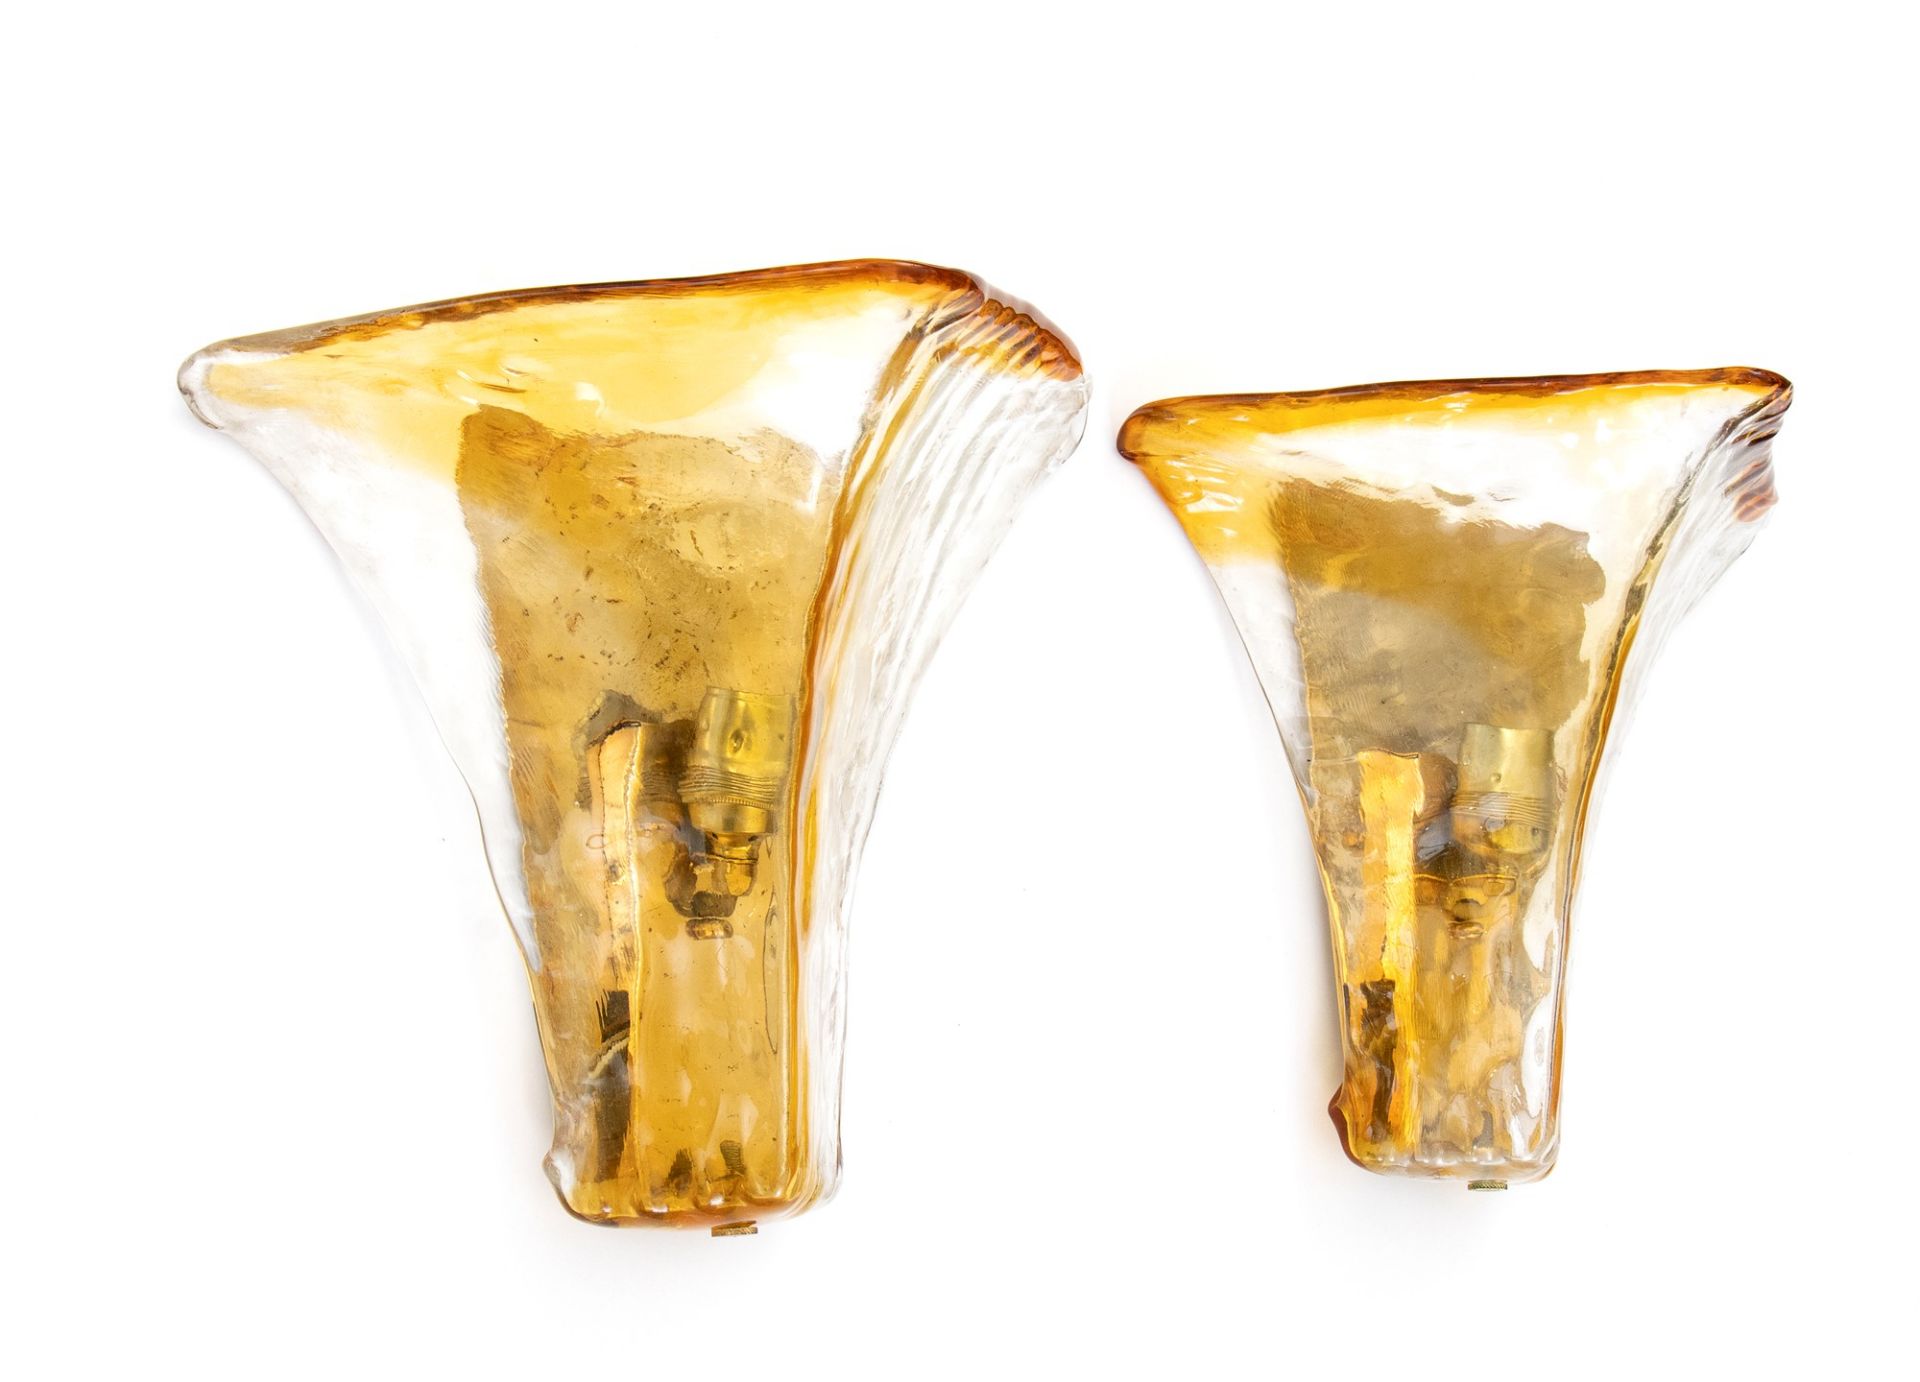 Pair of wall sconces in Murano glass - Image 5 of 11